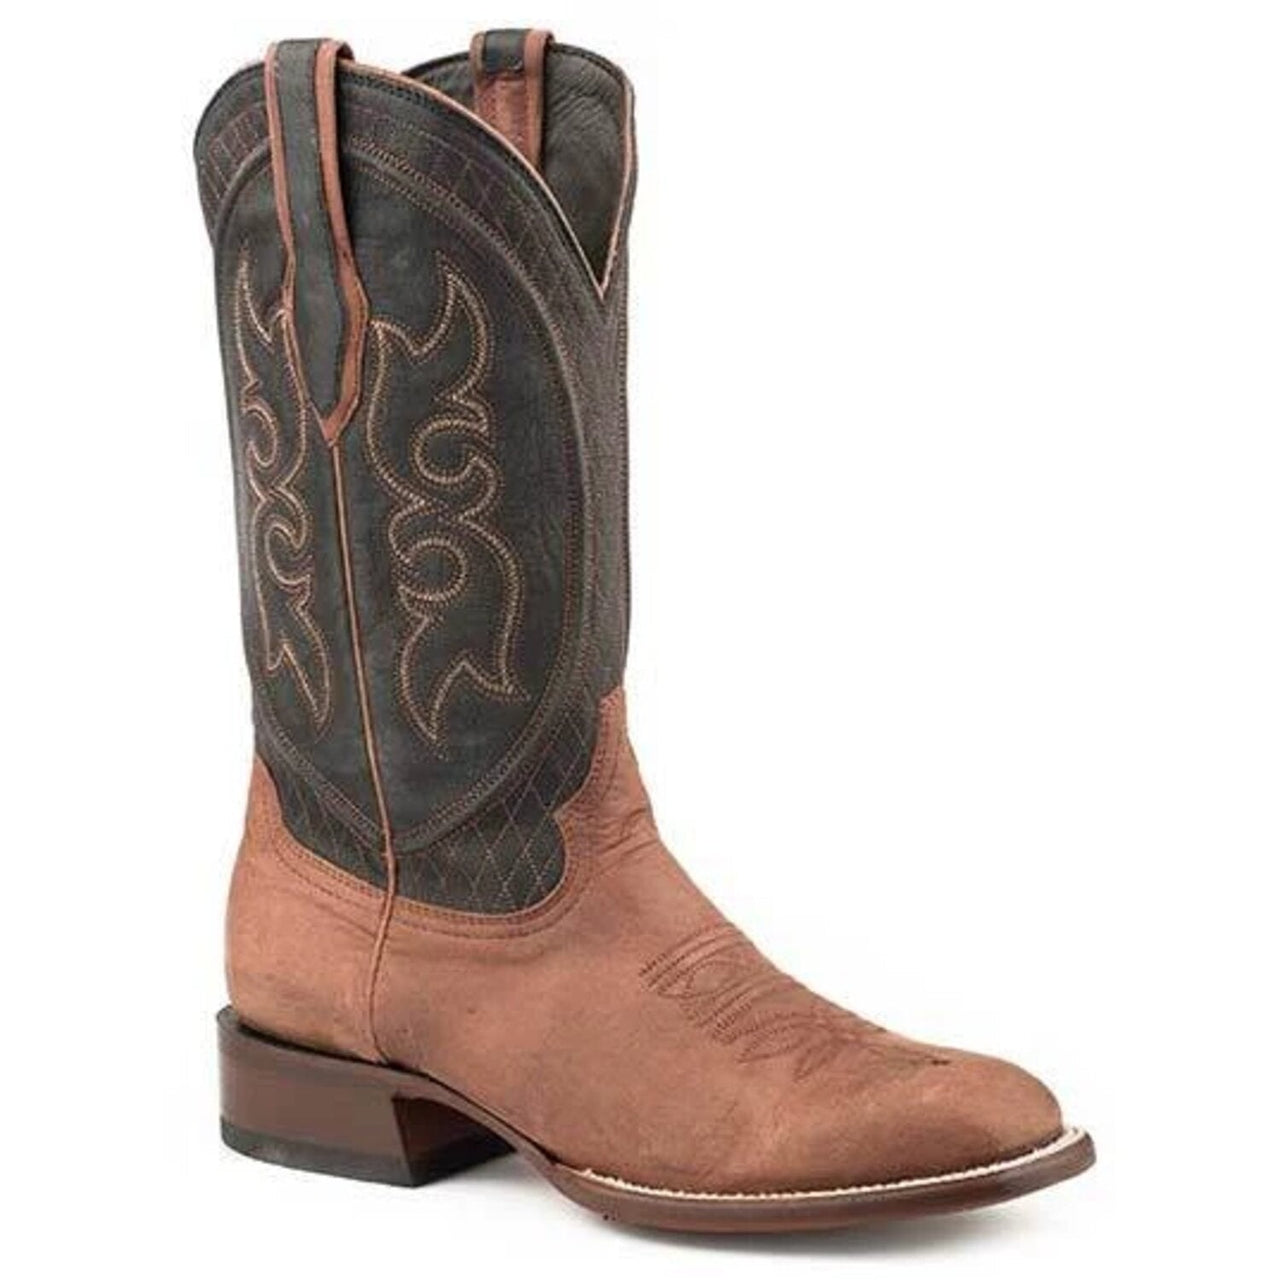 Men's Stetson Westby Western Boots Handcrafted JBS Collection Brown - yeehawcowboy